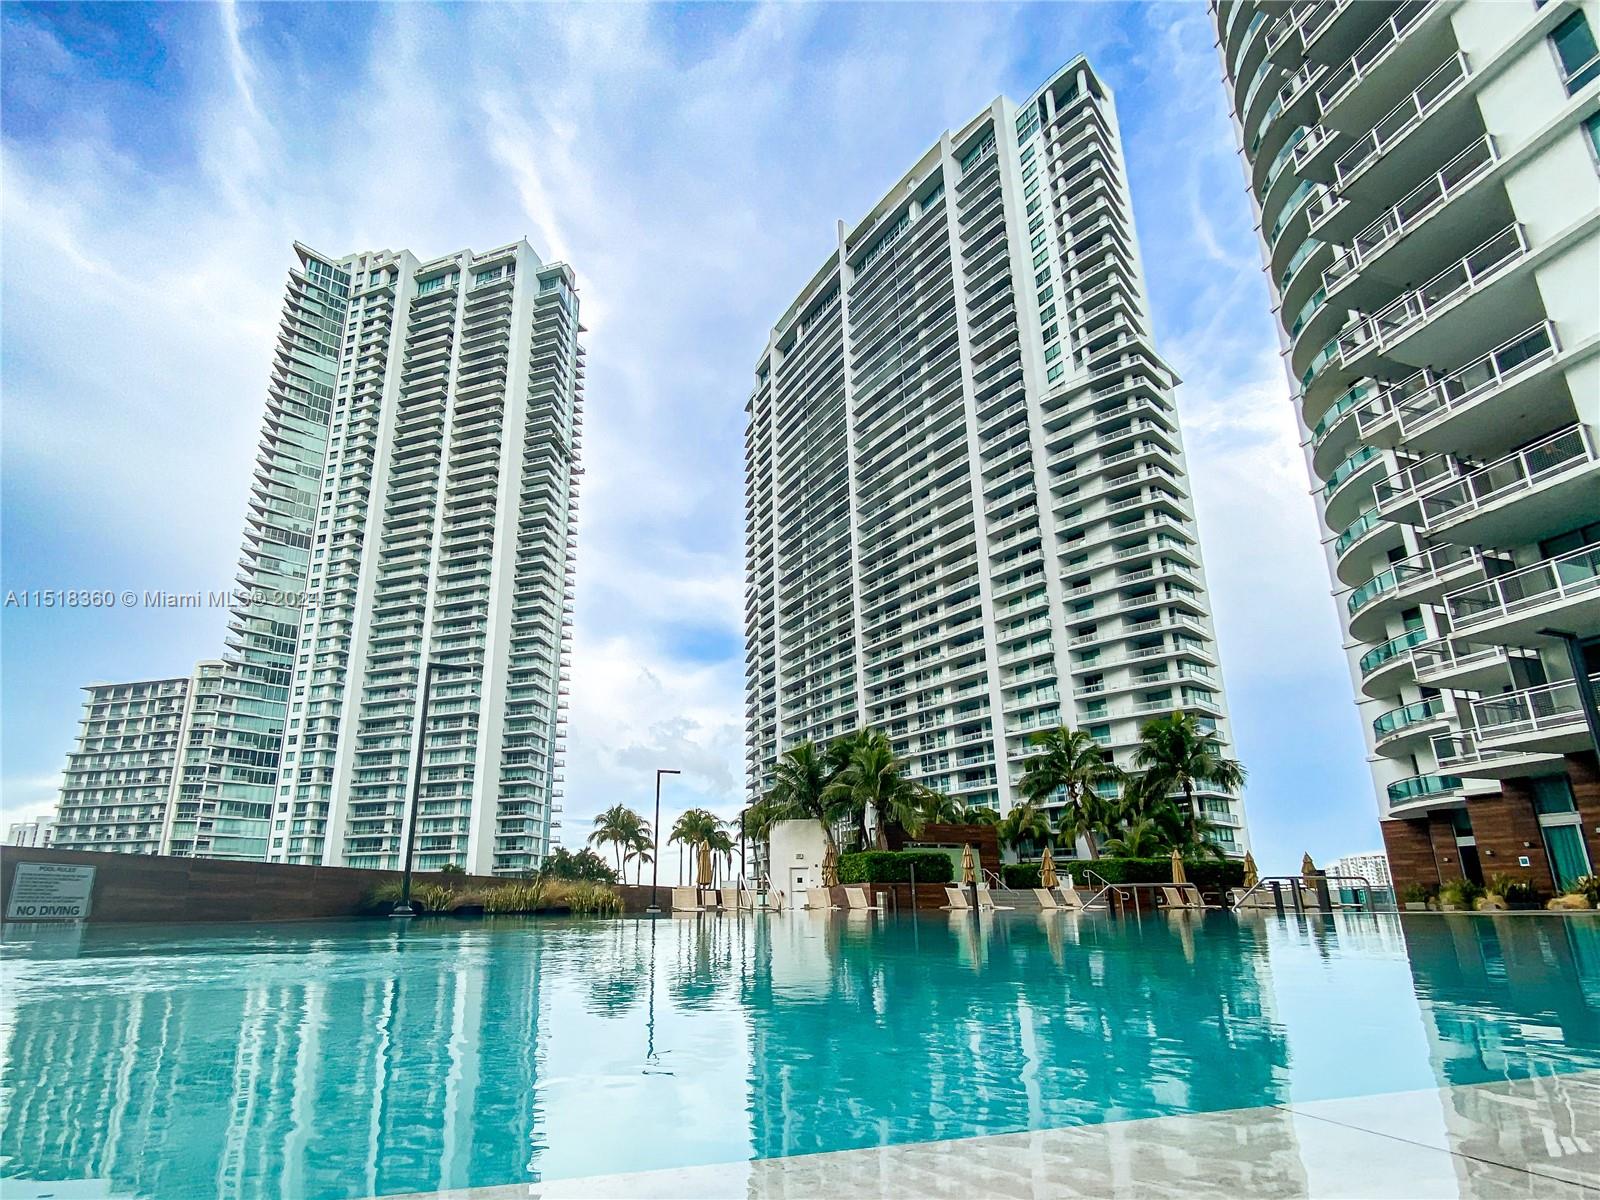 a view of swimming pool with tall buildings